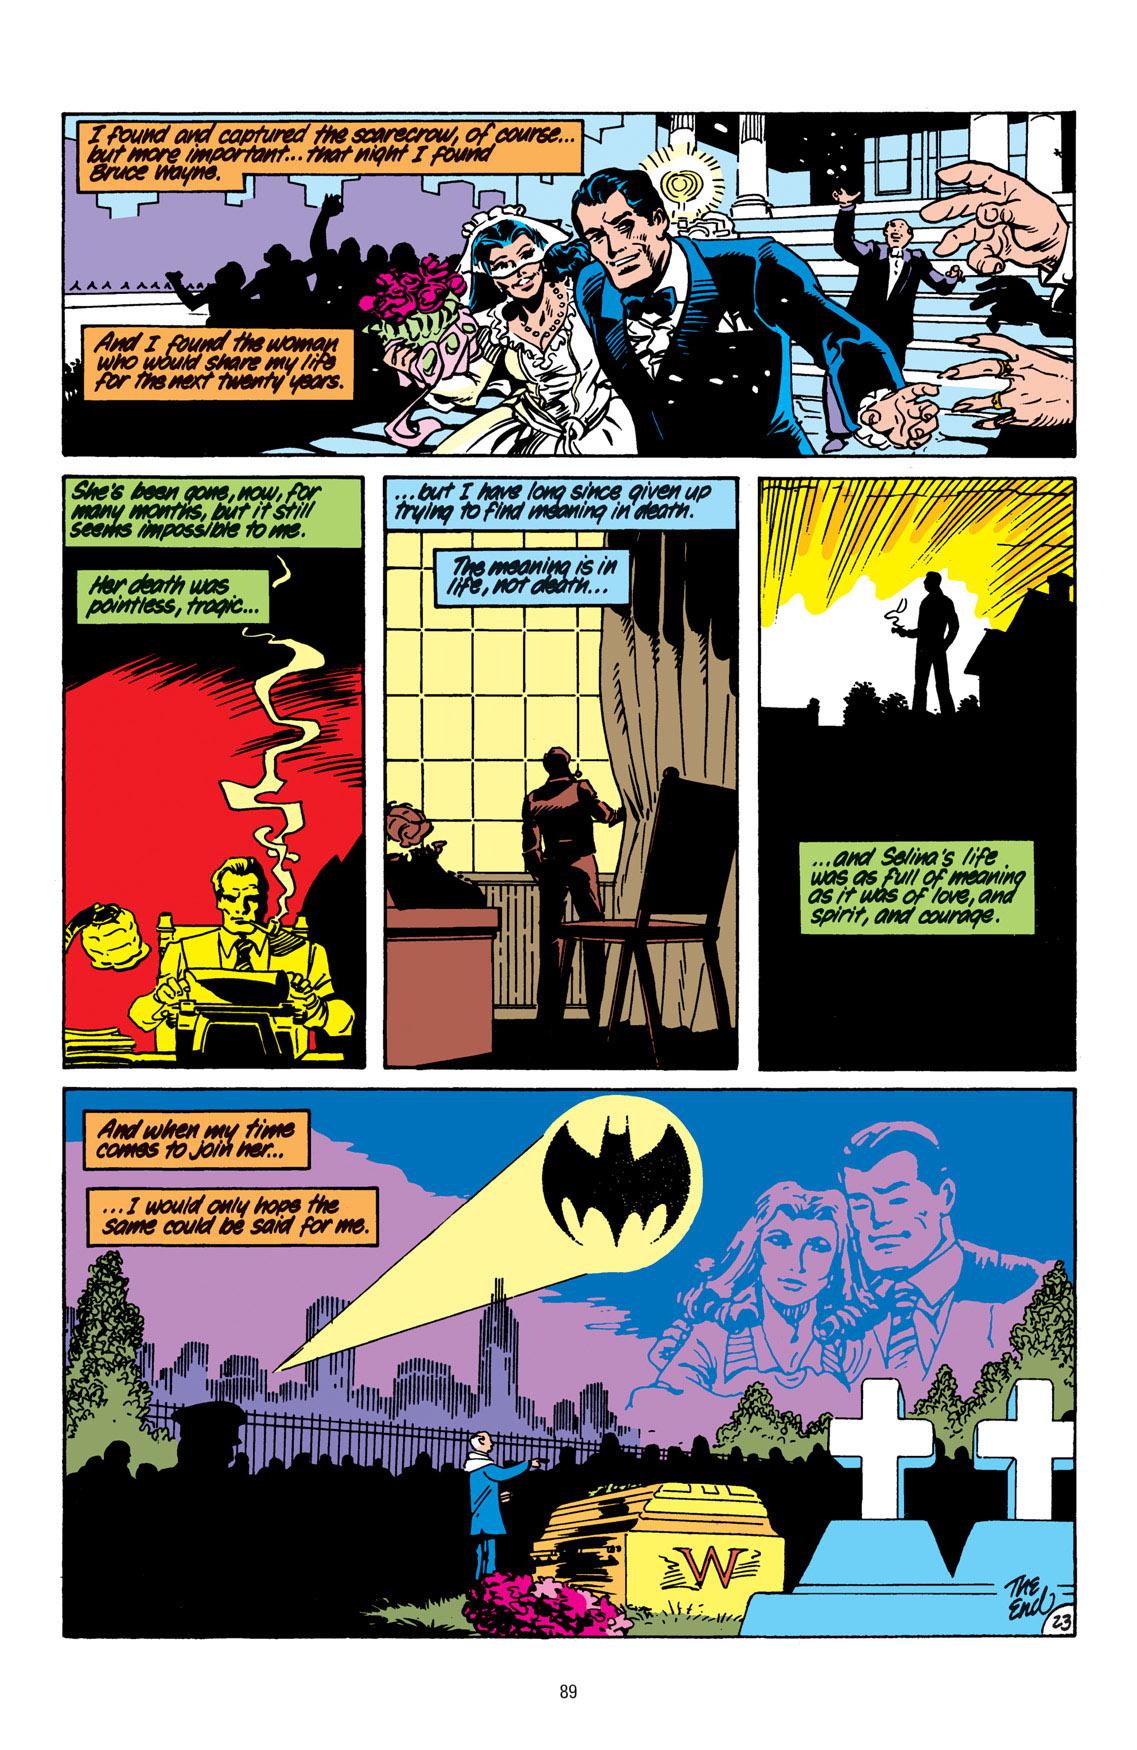 Batman: The Bat and the Cat: 80 Years of Romance (2020) Chapter 1 - Page 91